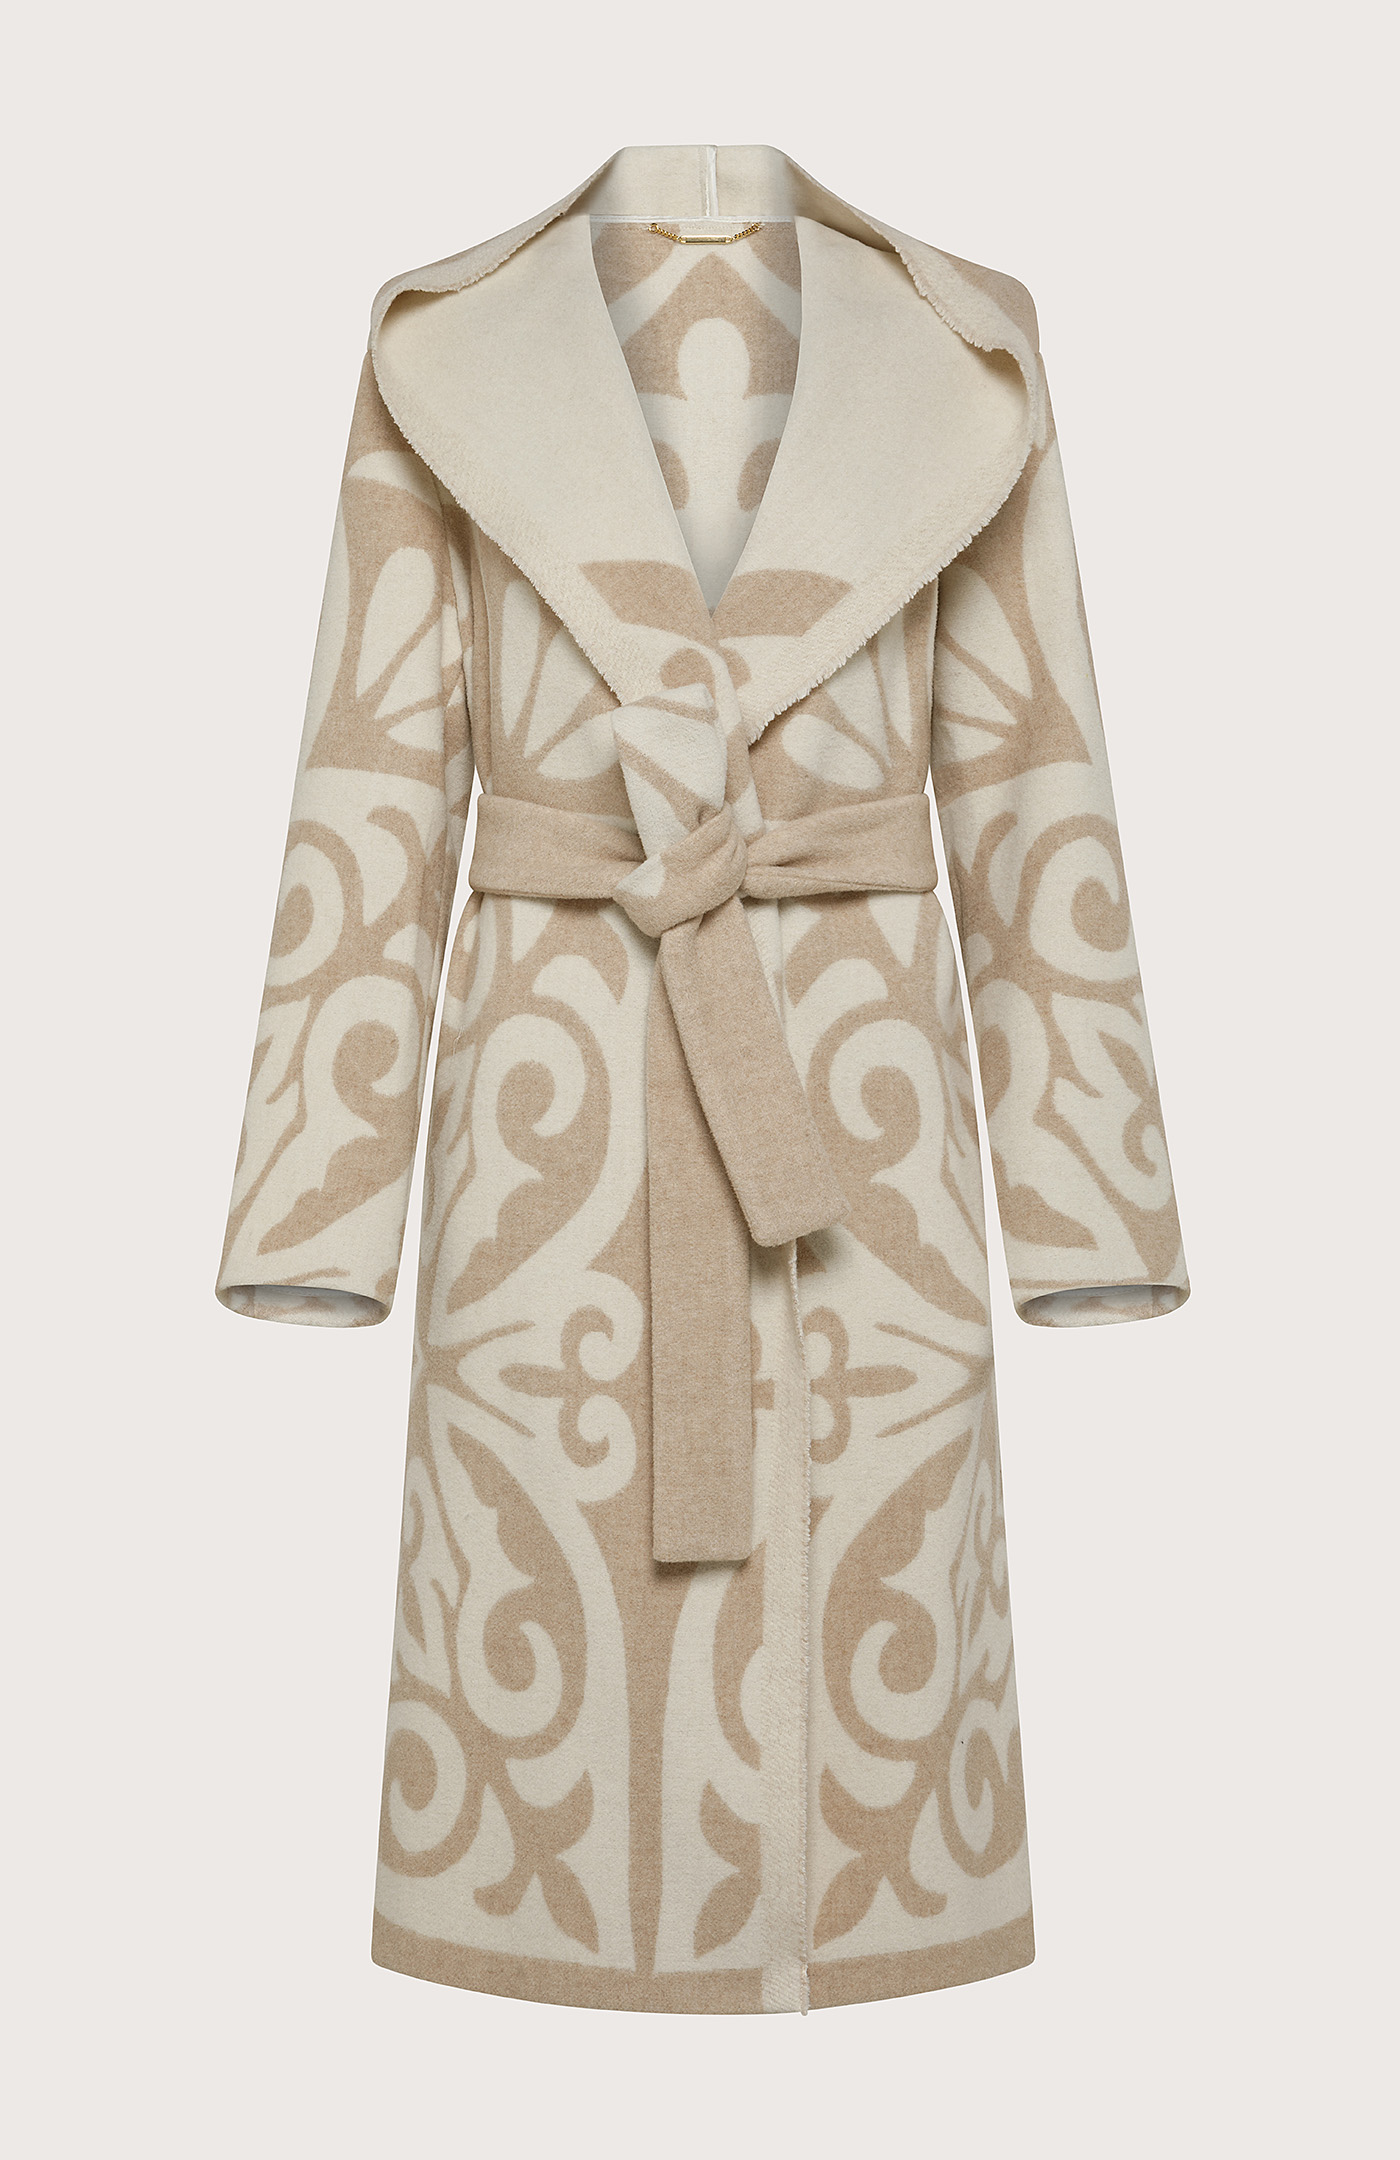 Dressing gown-style coat - Col. Neutral | Seventy®